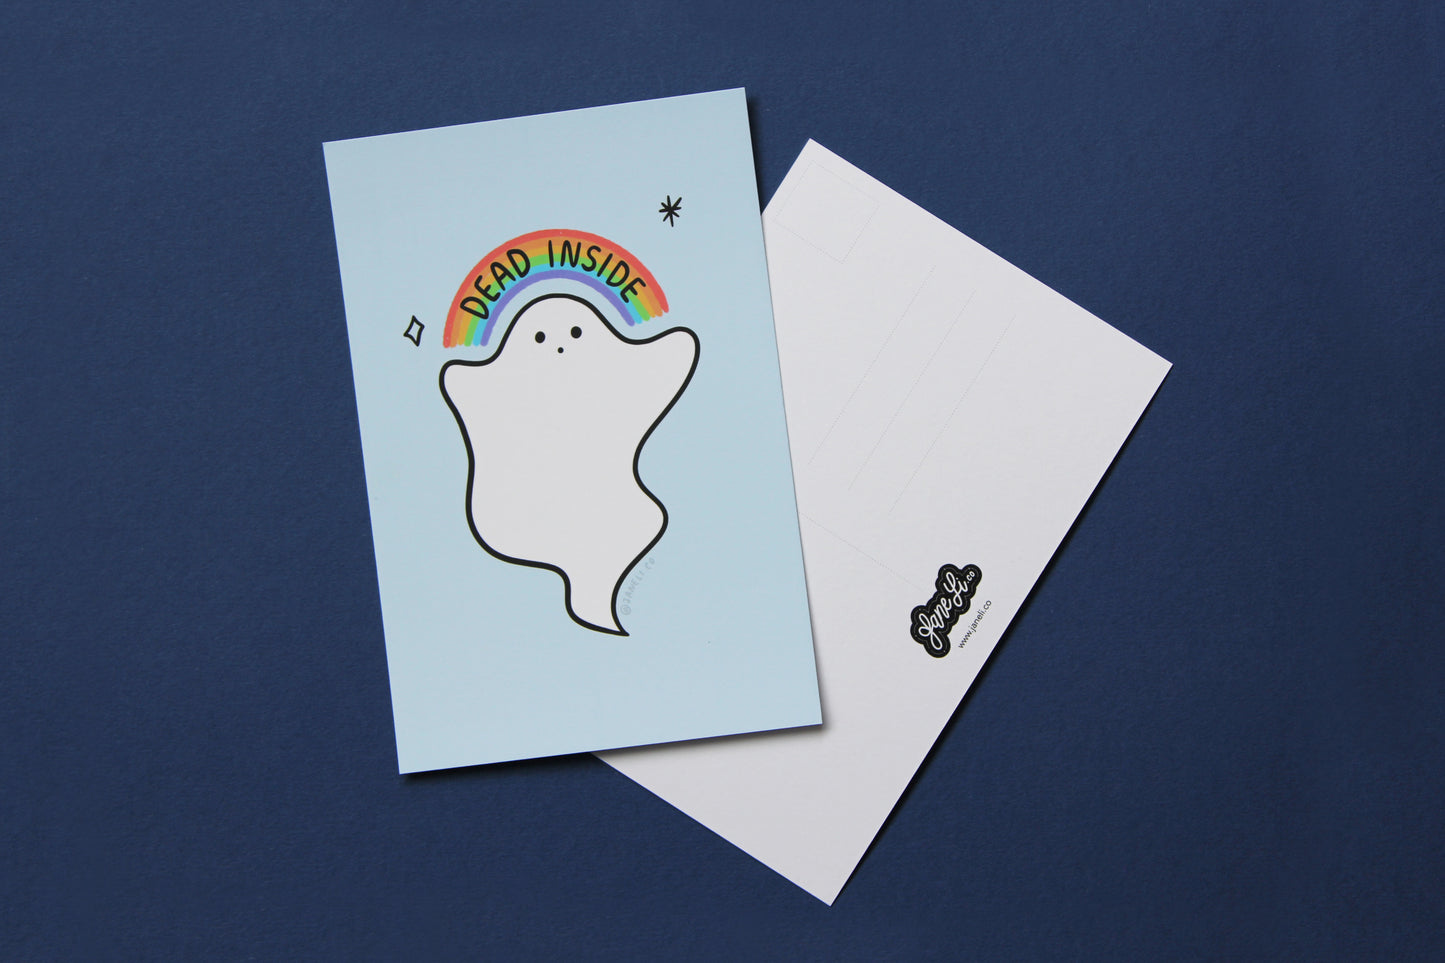 A JaneLi.Co mini print/postcard that shows a little white ghost holding up a rainbow that says "Dead Inside" and a back postcard side of the same print over a navy blue background.